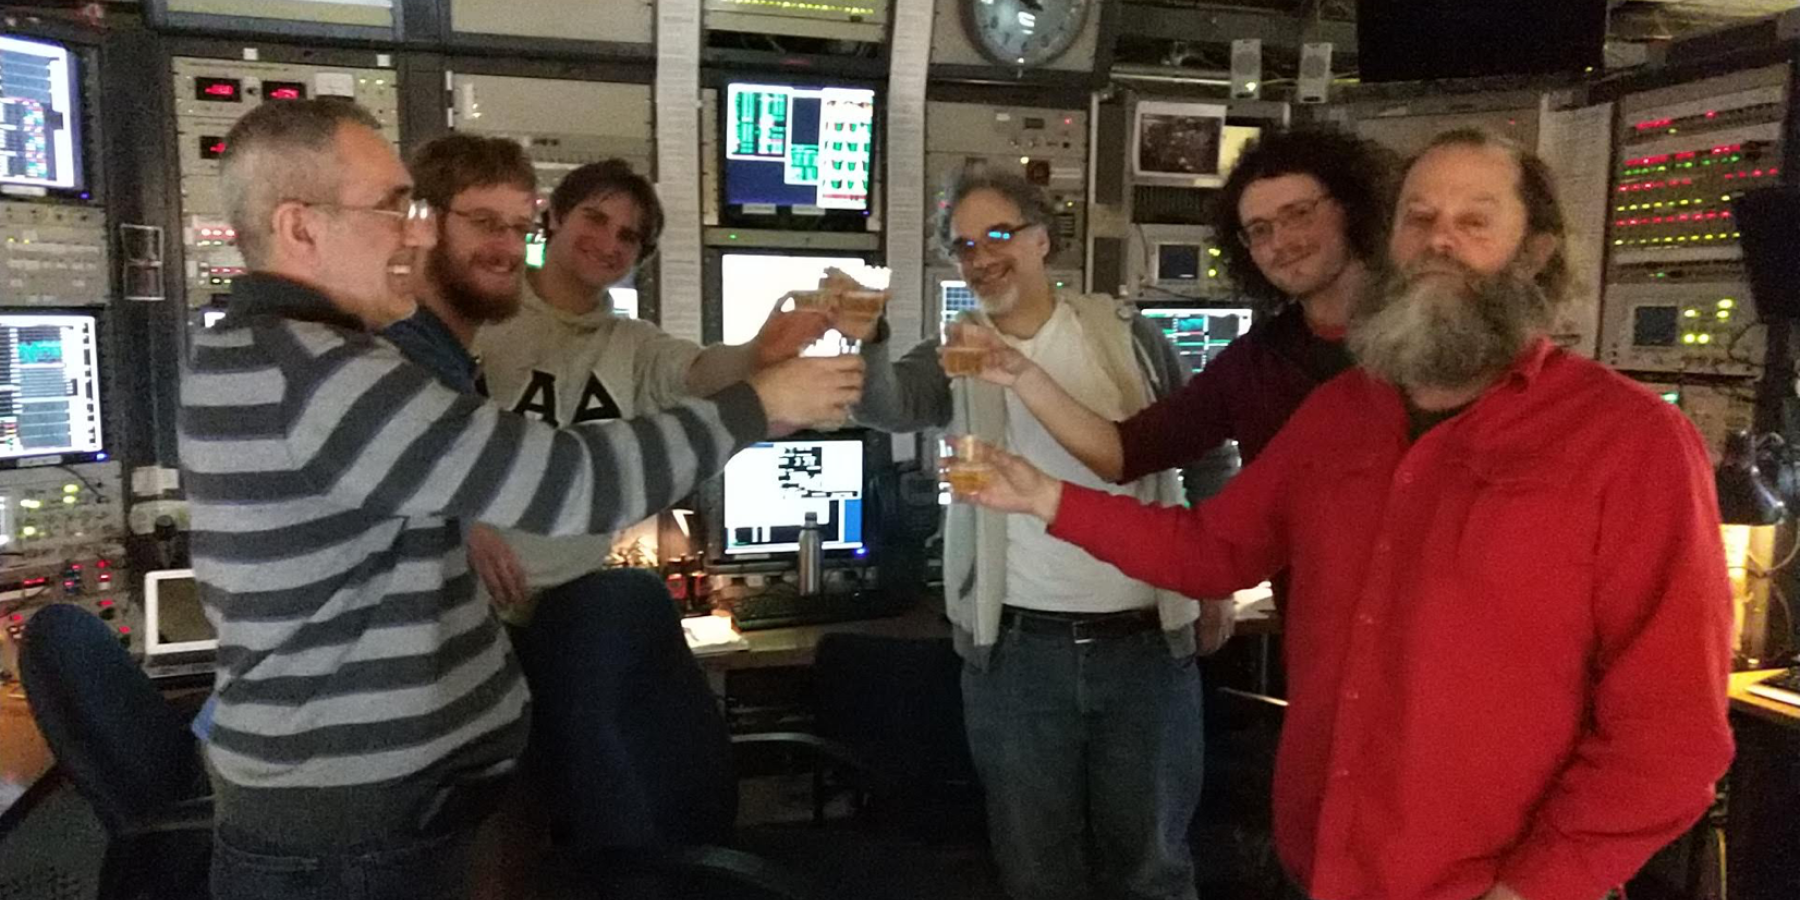 Team celebrates first turn of positrons on March 6, 2019